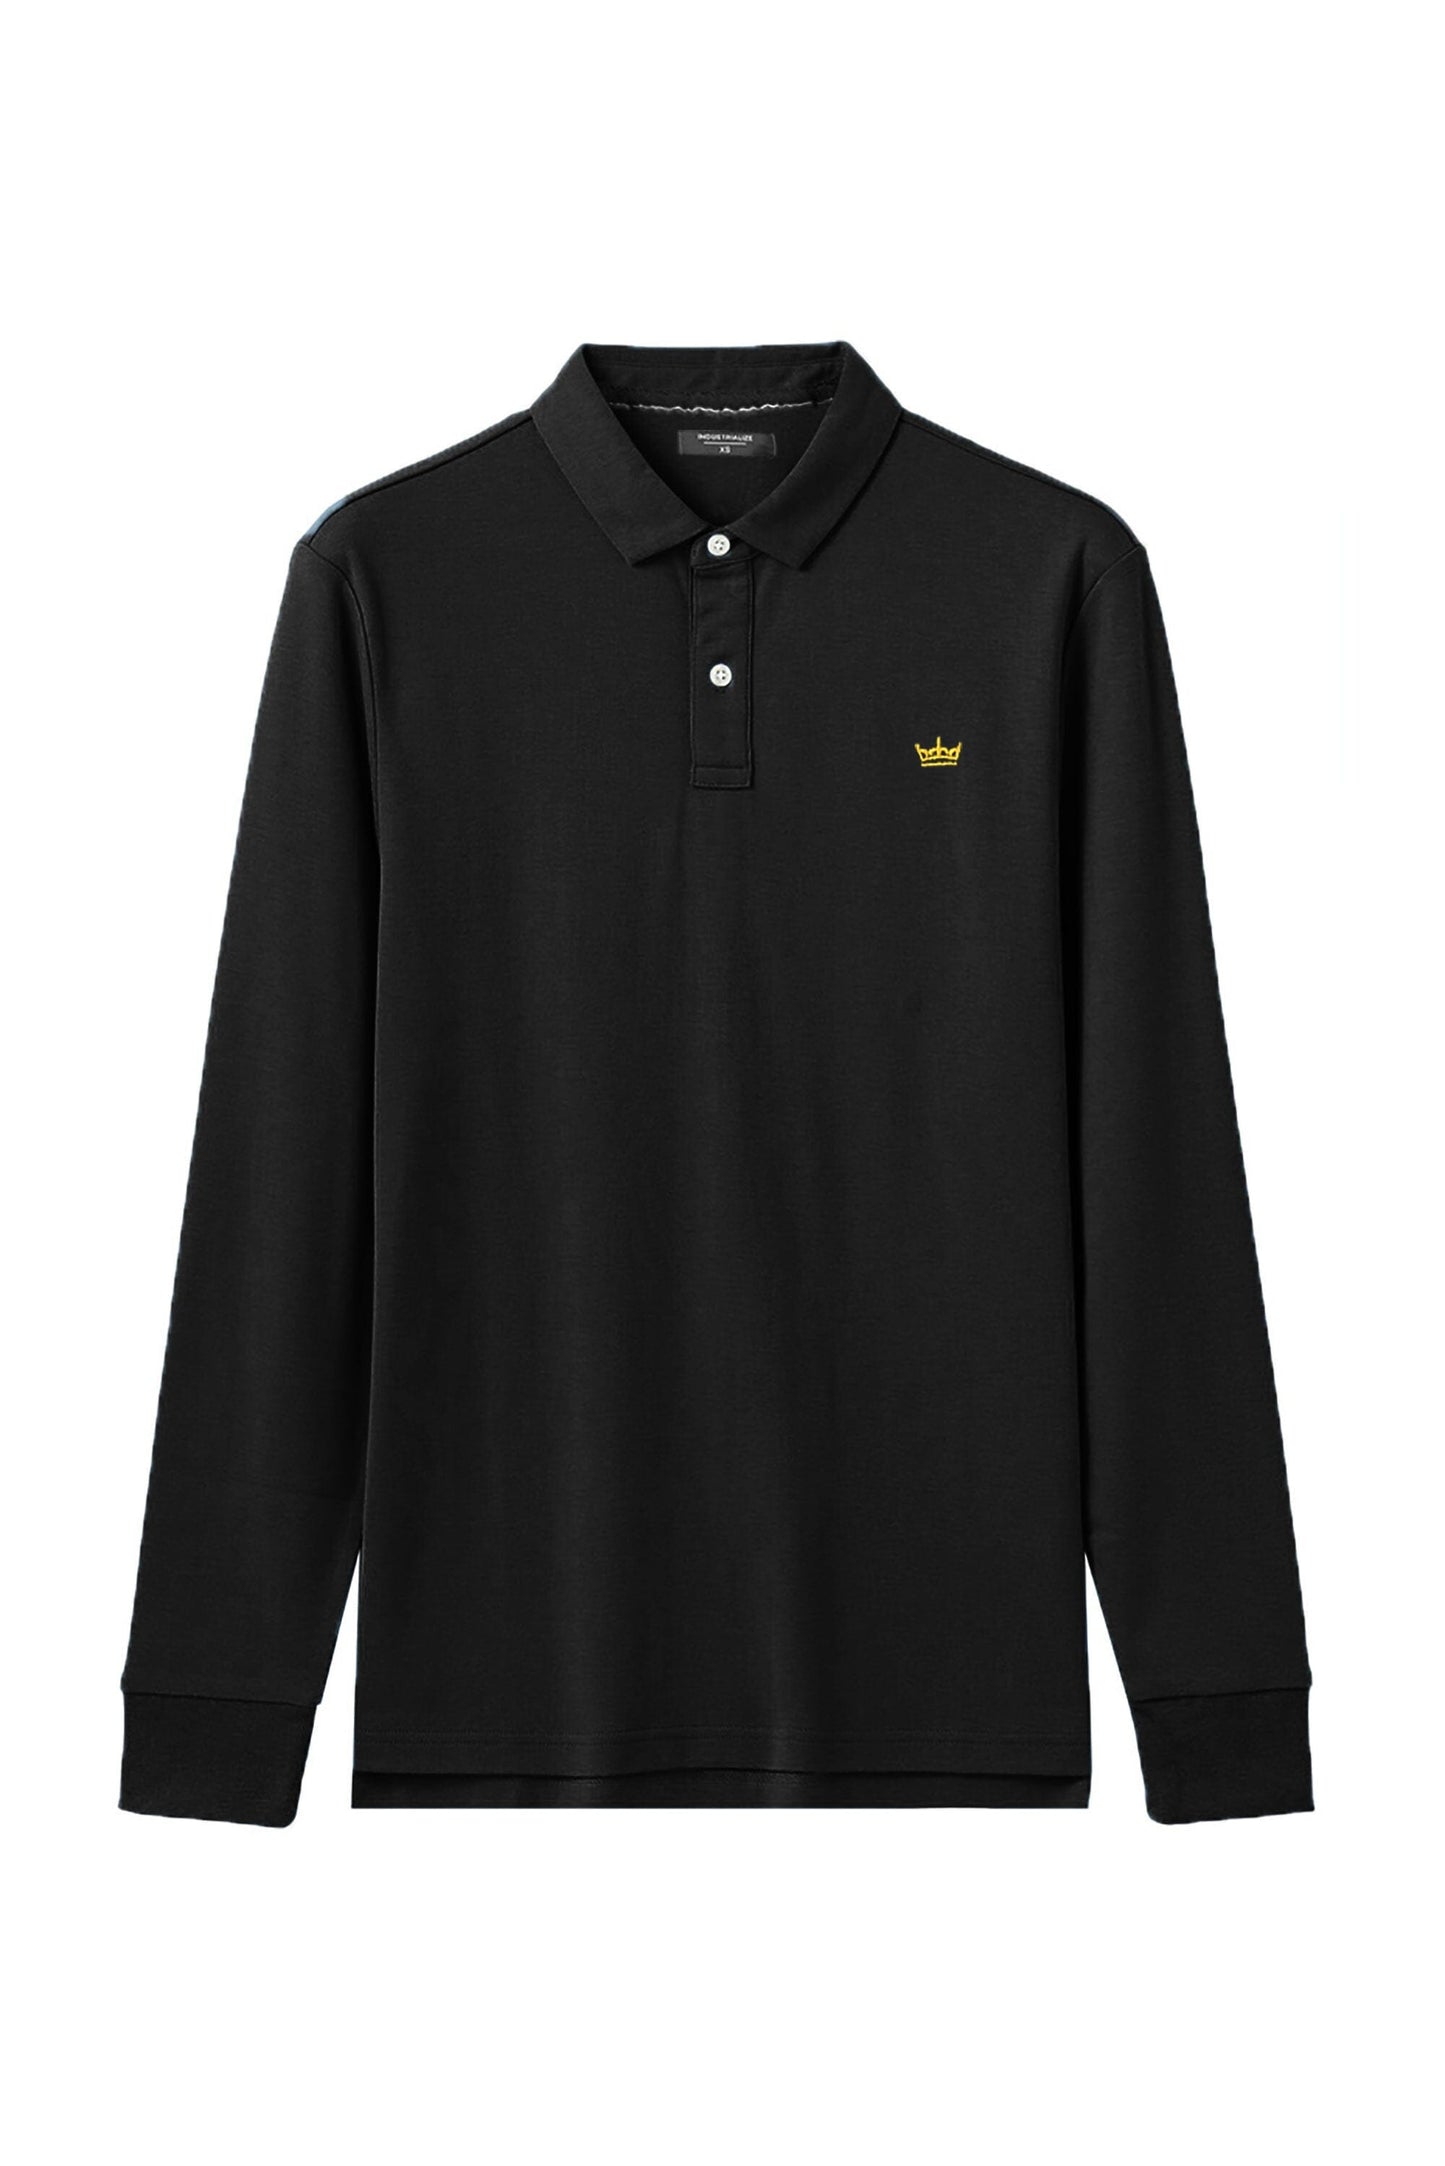 Industrialize Men's Crown Embroidered Minor Fault Long Sleeve Polo Shirt Men's Polo Shirt IST 